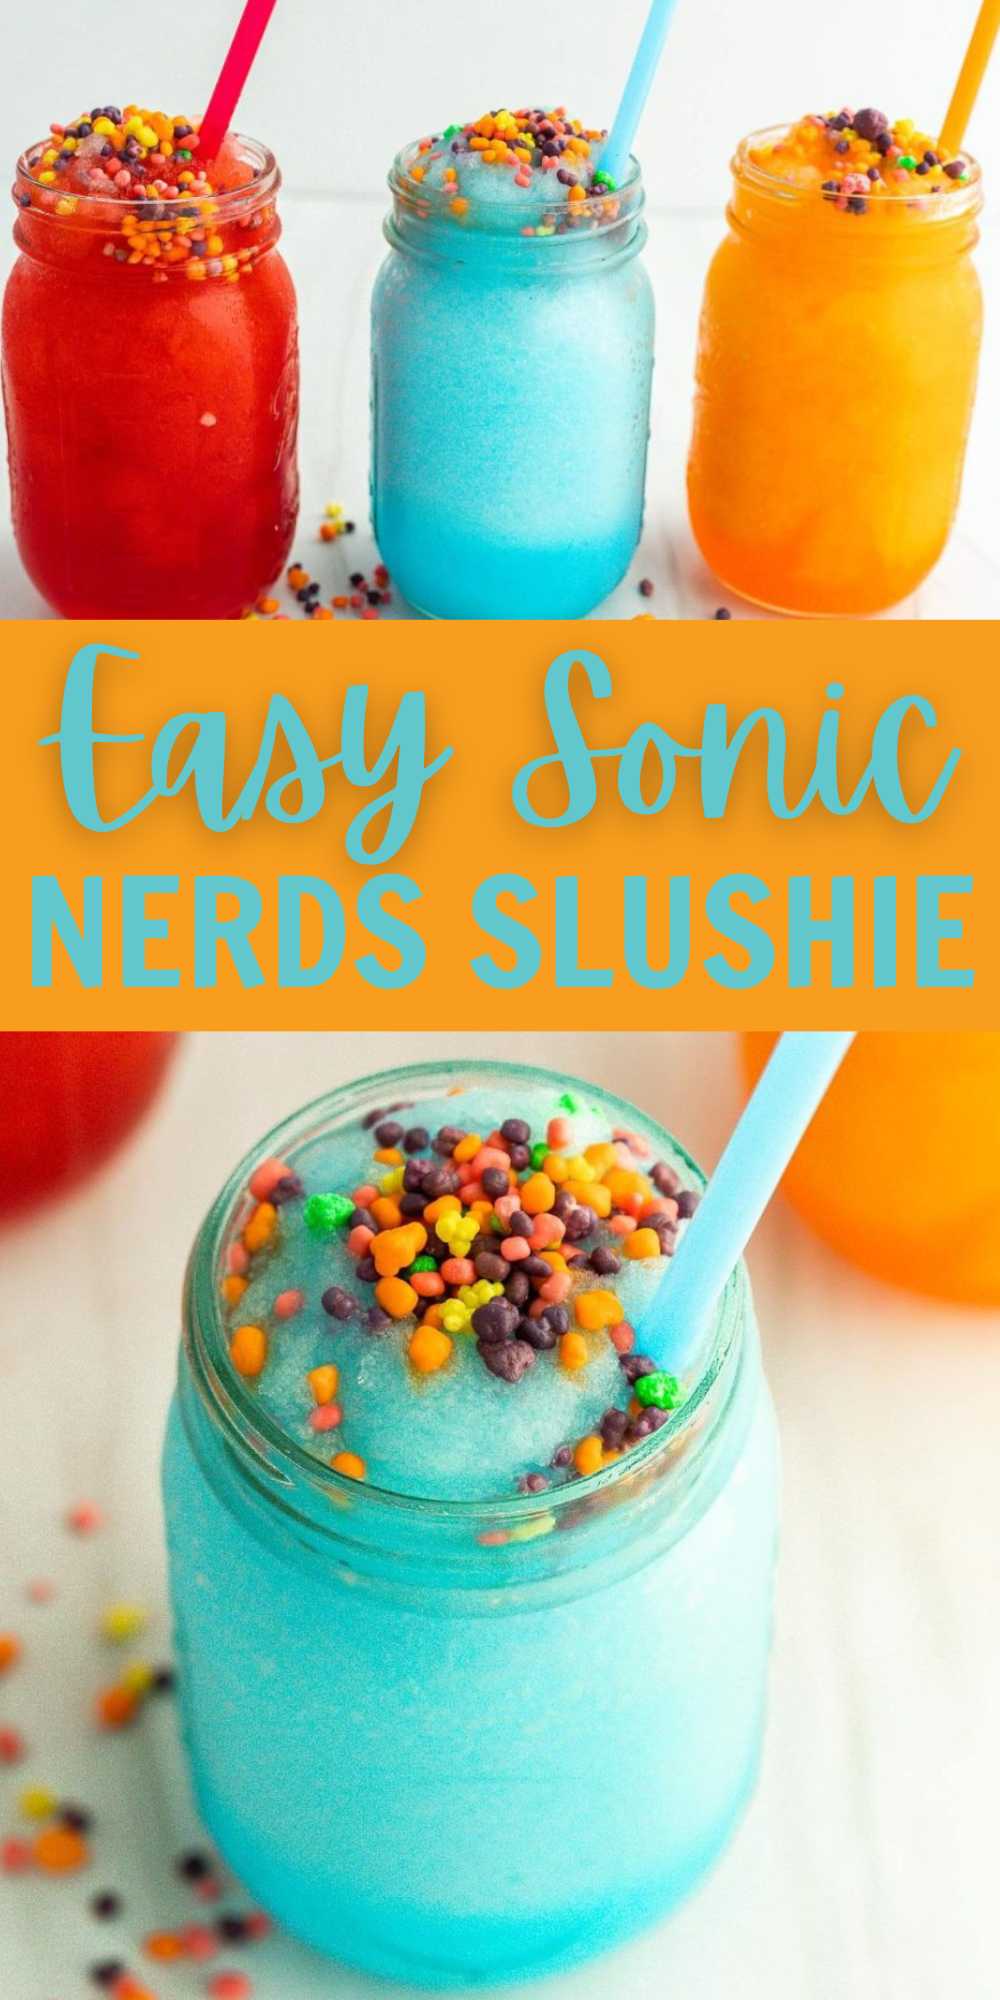 This Sonic Nerds Slushie is one of our favorite frozen drink. It is loaded with flavor and adding the Nerds makes it a fun drink. We love copycat recipes and this is one of the best ones we make. It taste amazing and you will love the fun texture. #eatingonadime #sonicnerdsslushie #nerdsslushie